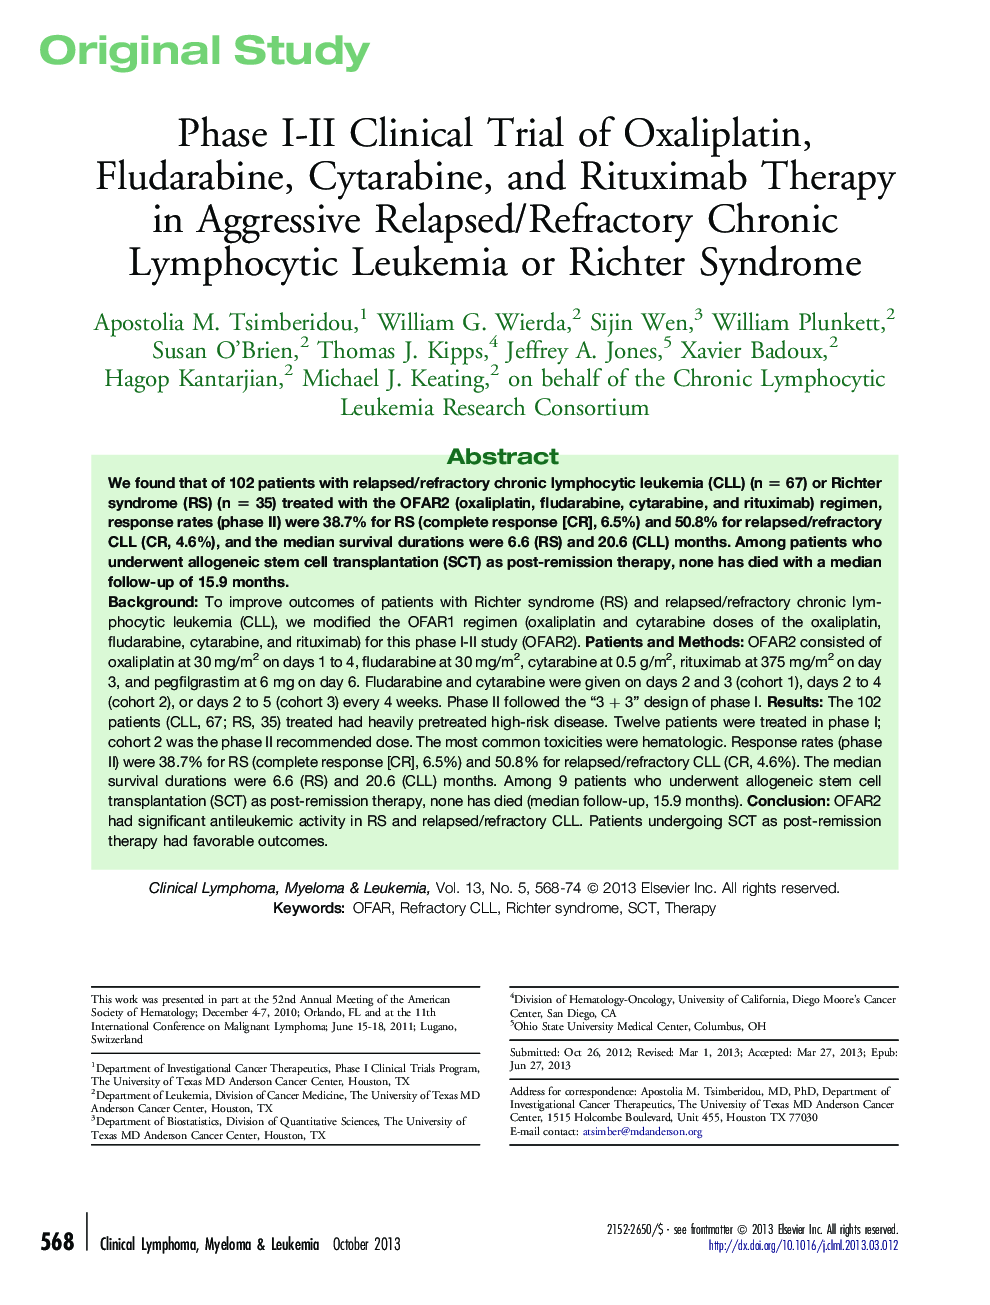 Phase I-II Clinical Trial of Oxaliplatin, Fludarabine, Cytarabine, and Rituximab Therapy in Aggressive Relapsed/Refractory Chronic Lymphocytic Leukemia or Richter Syndrome